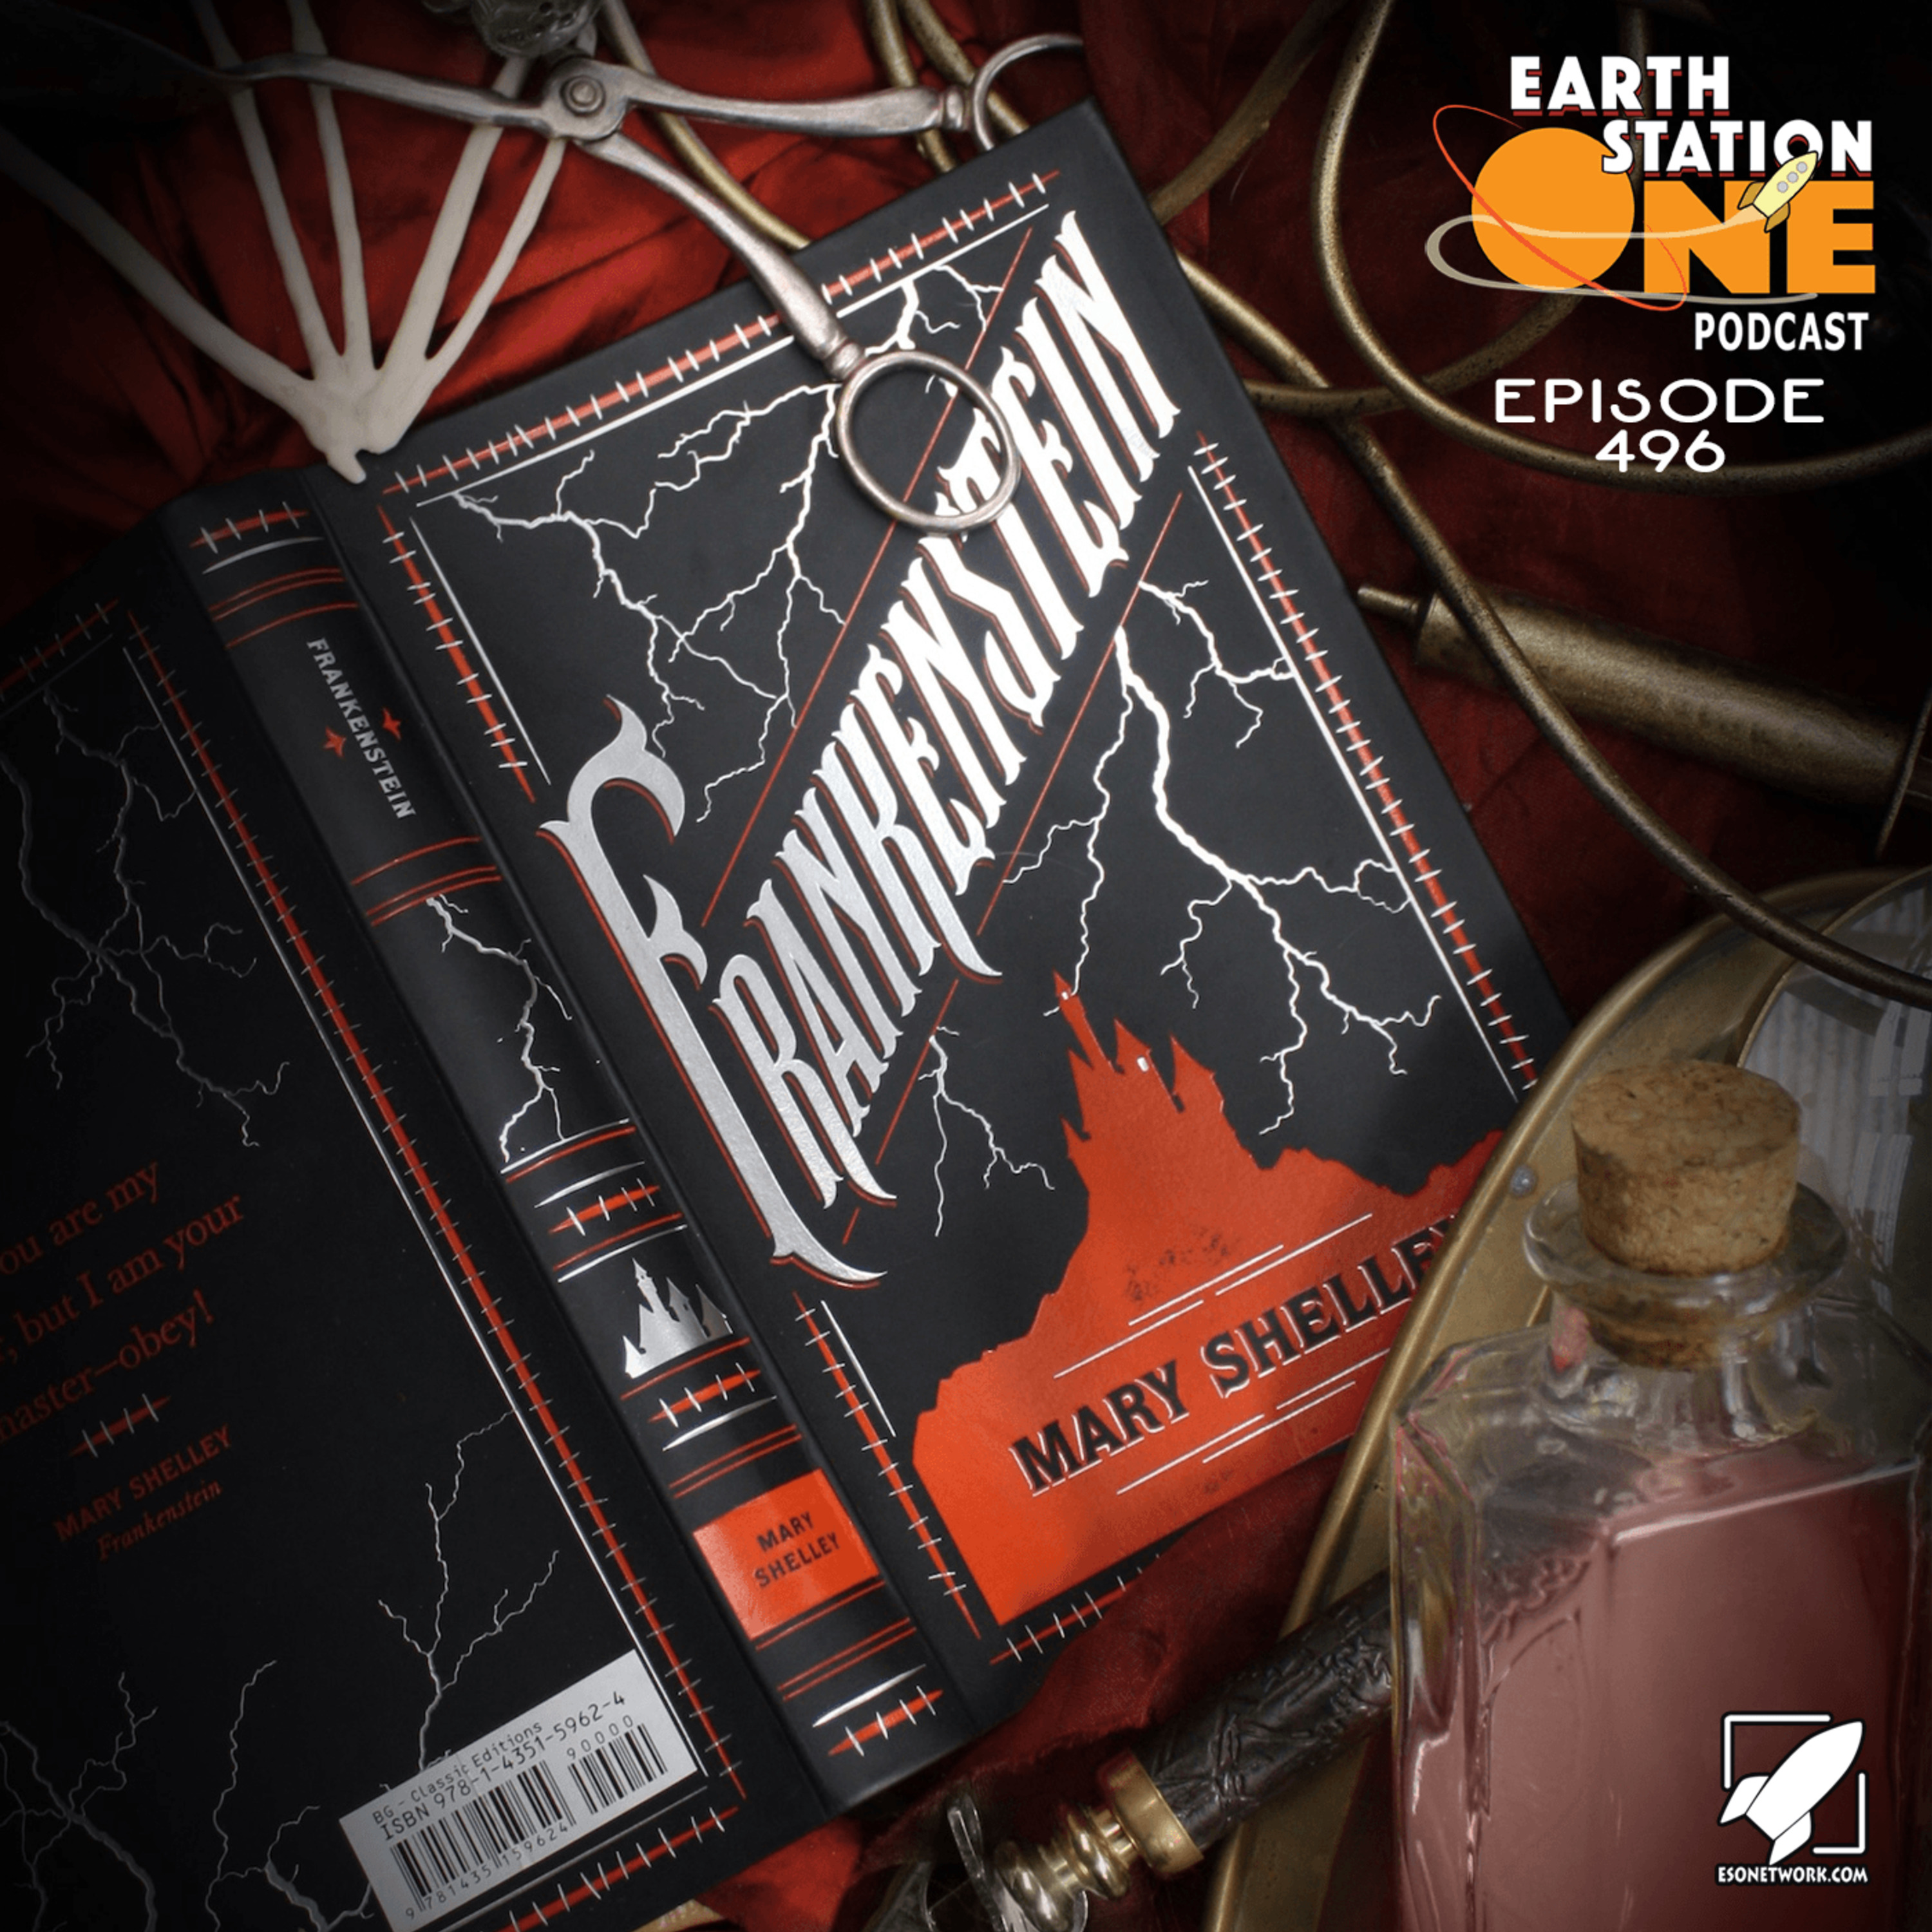 The Earth Station One Podcast – ESO Book Club ‘Frankenstein’